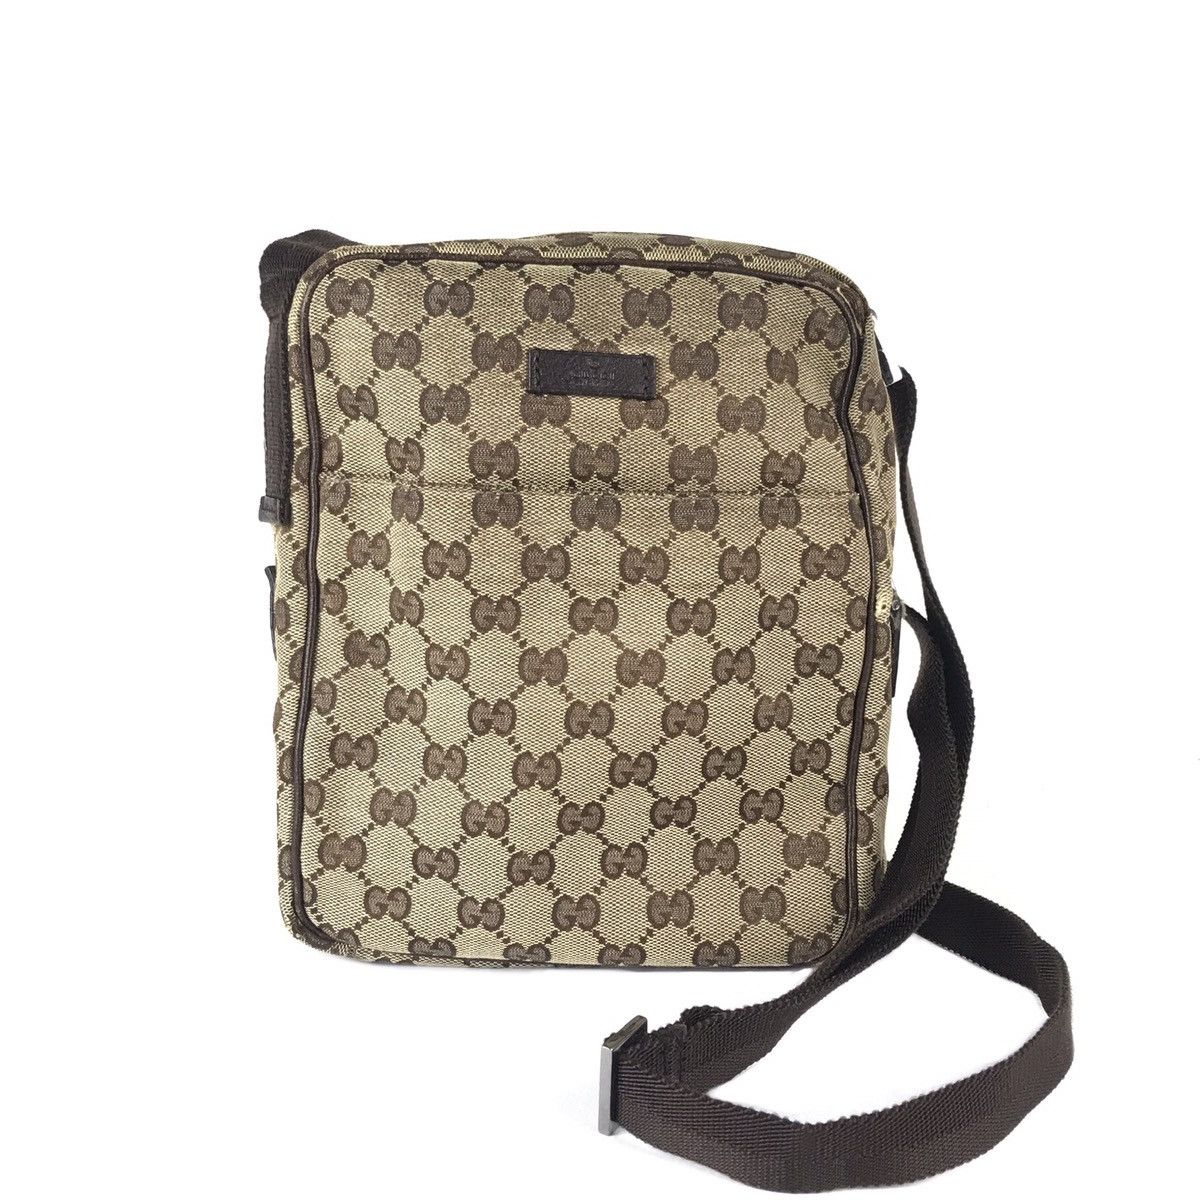 Gucci Monogram Crossbody Bag Size ONE SIZE - 1 Preview